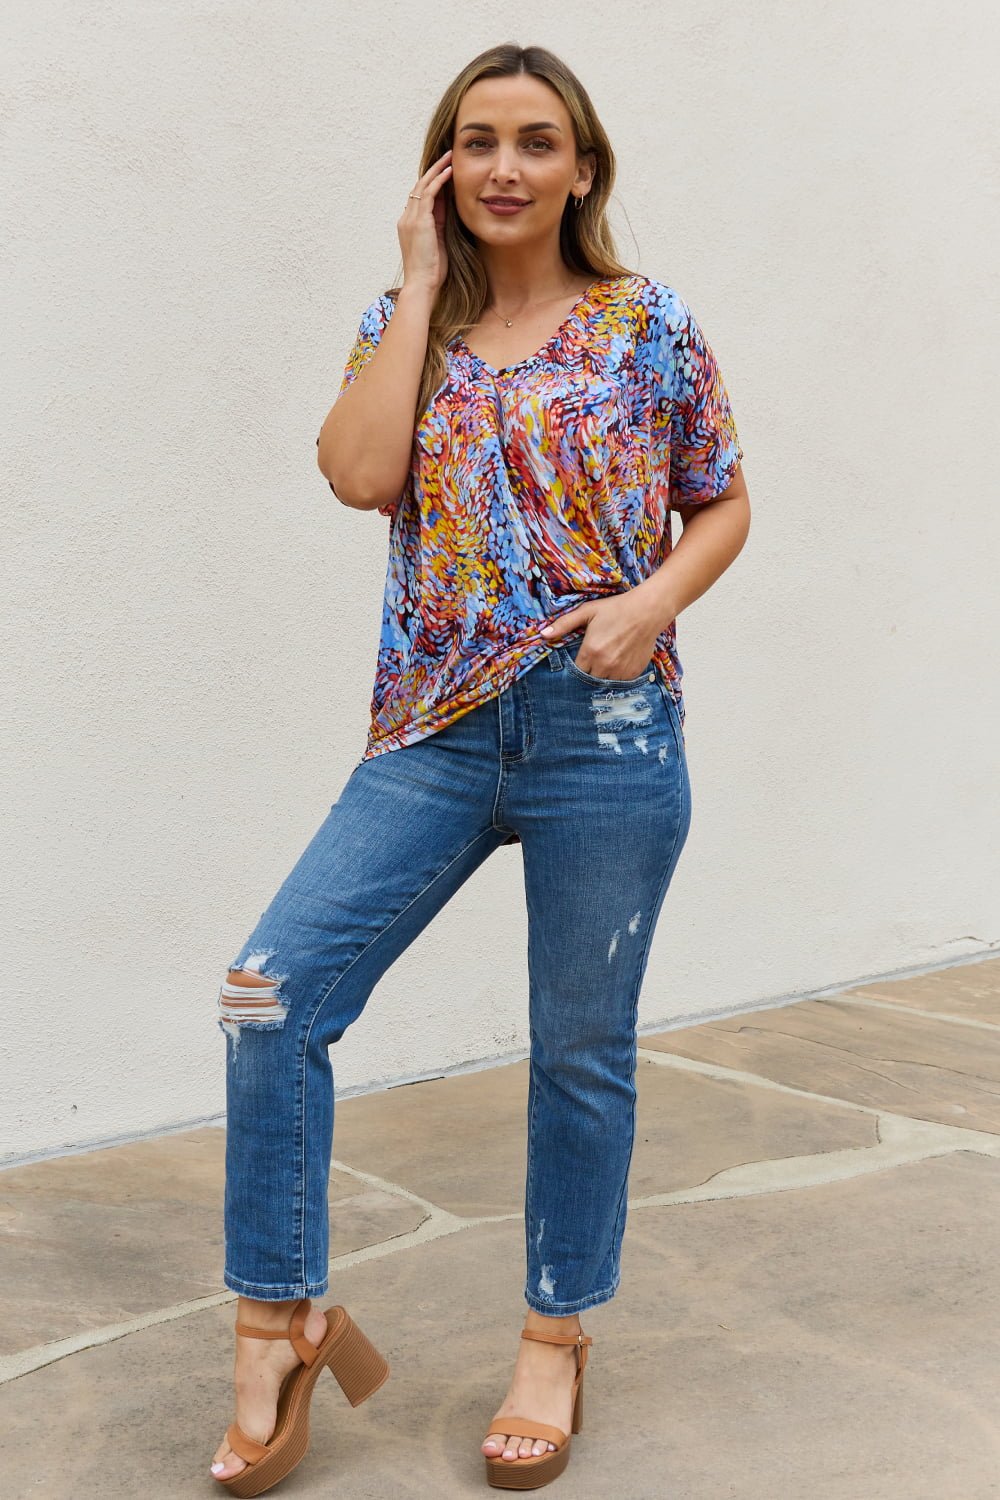 Be Stage Full Size Printed Dolman Flowy Top - pvmark